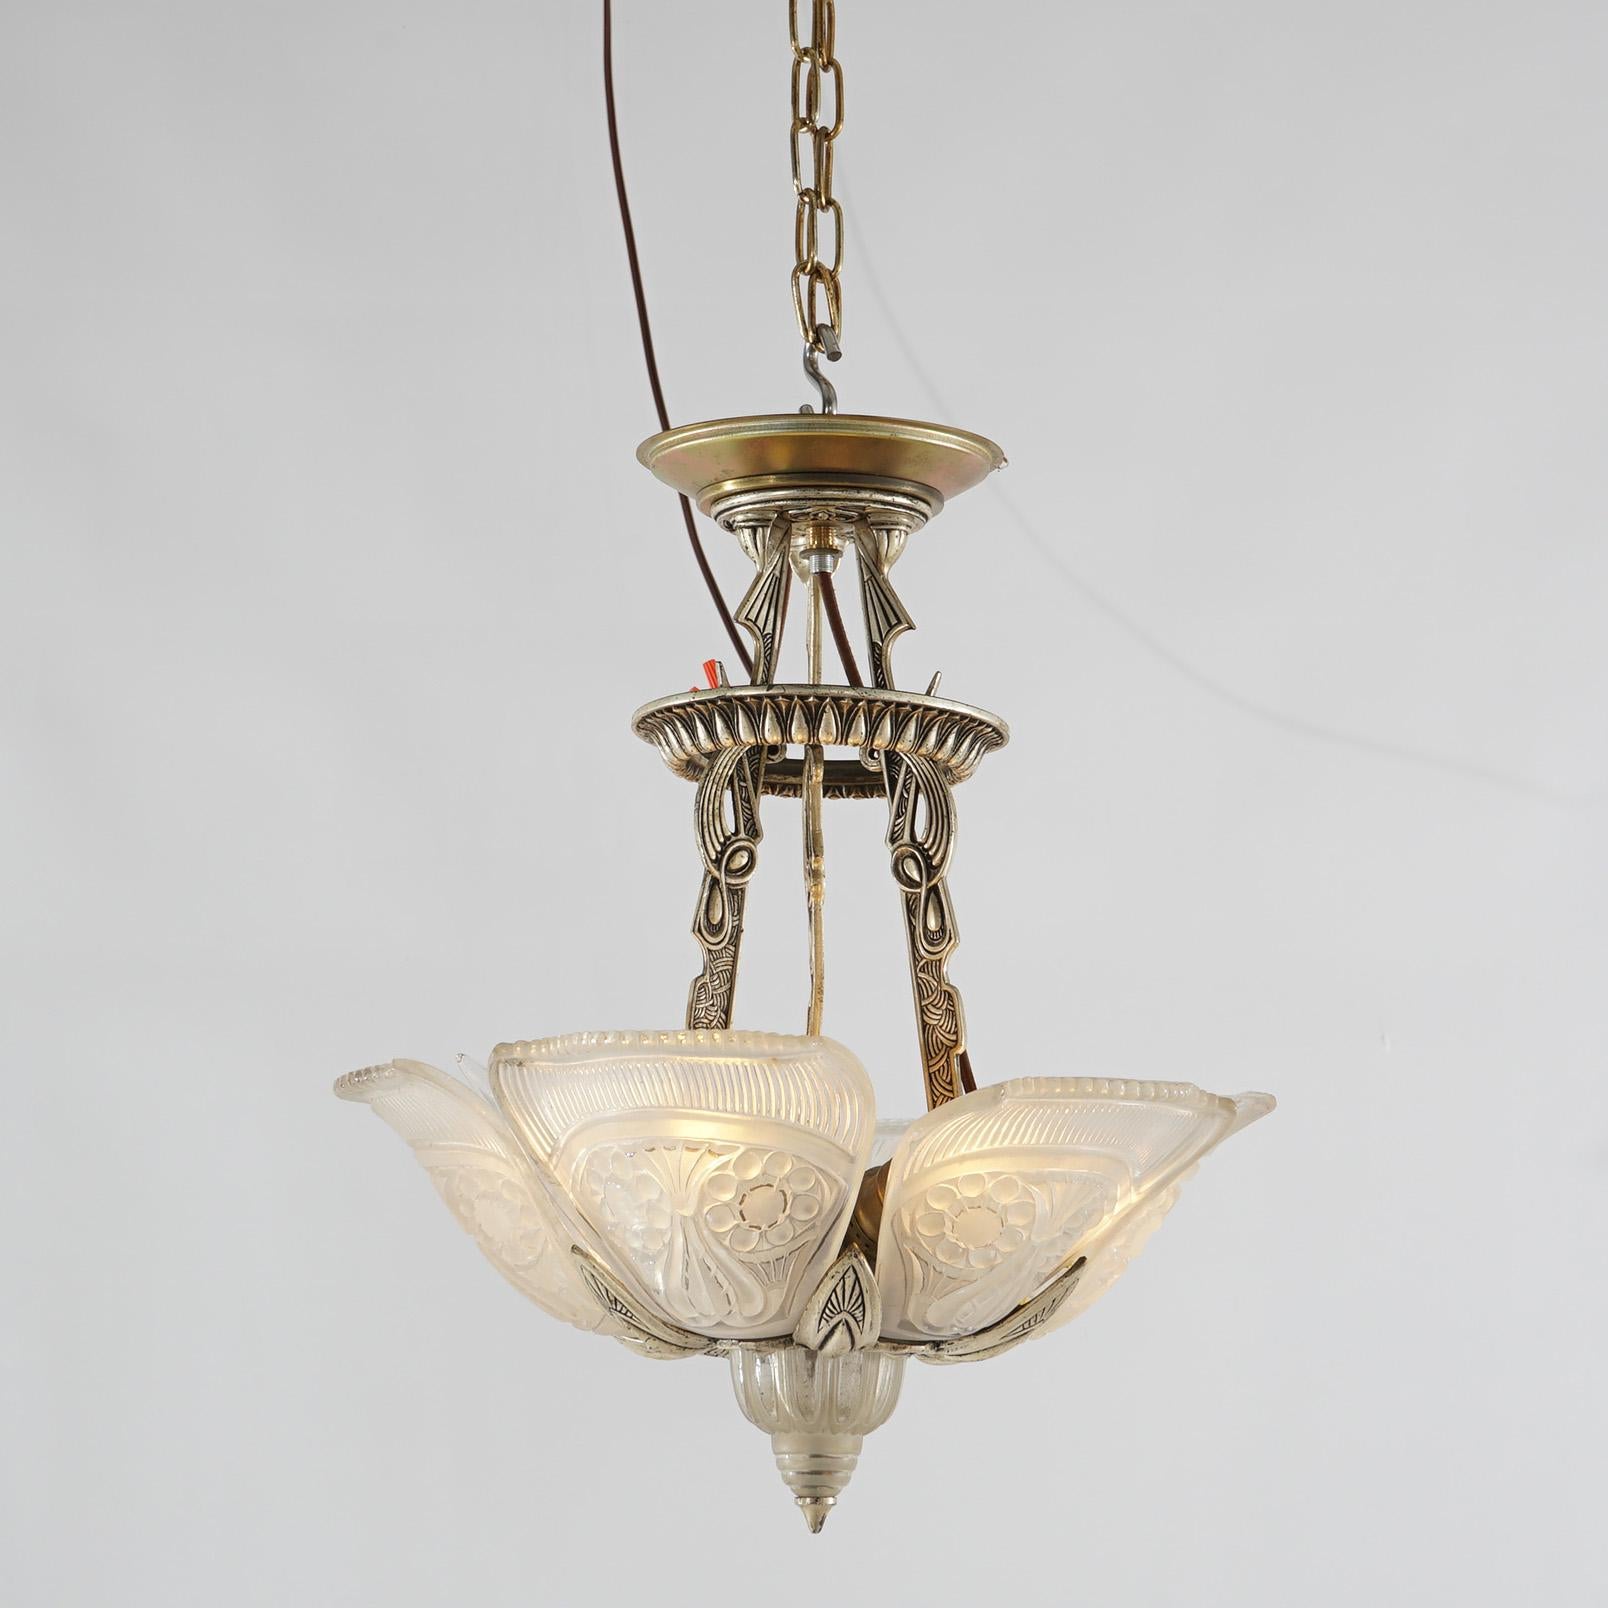 An Antique Art Deco Slip Shade Hanging Light with Opalescent Floral Pressed Glass, C1920

Measures - 17